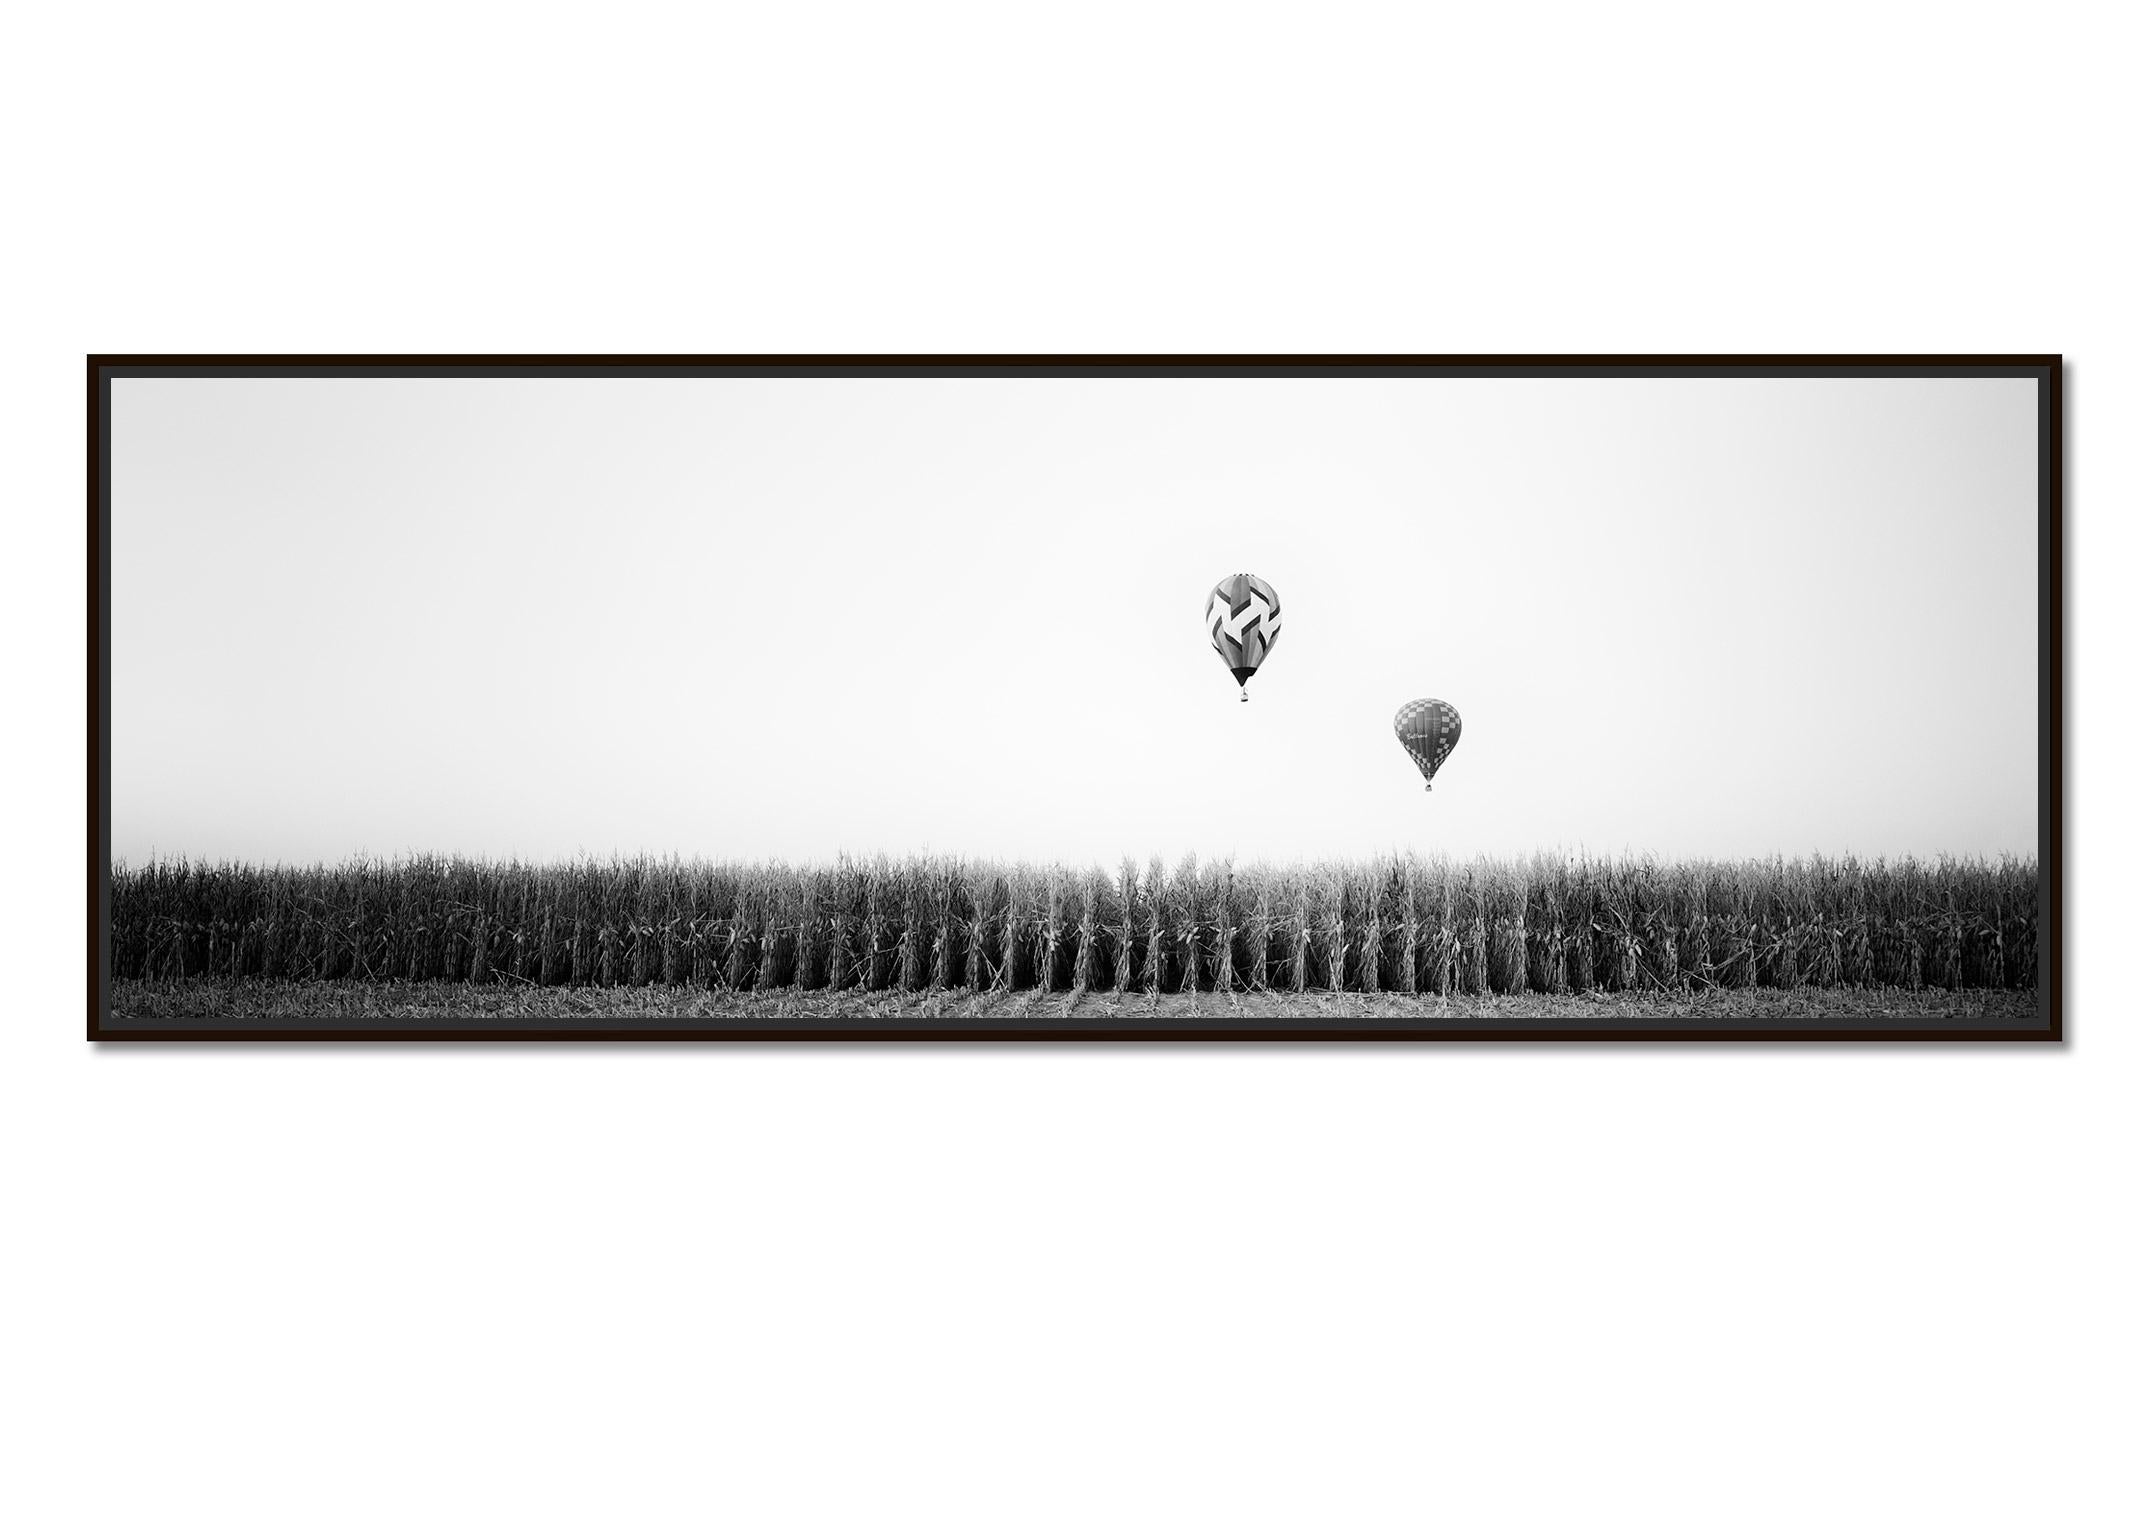 Hot Air Balloon Panorama, Cornfield, black and white, art landscape, photography - Photograph by Gerald Berghammer